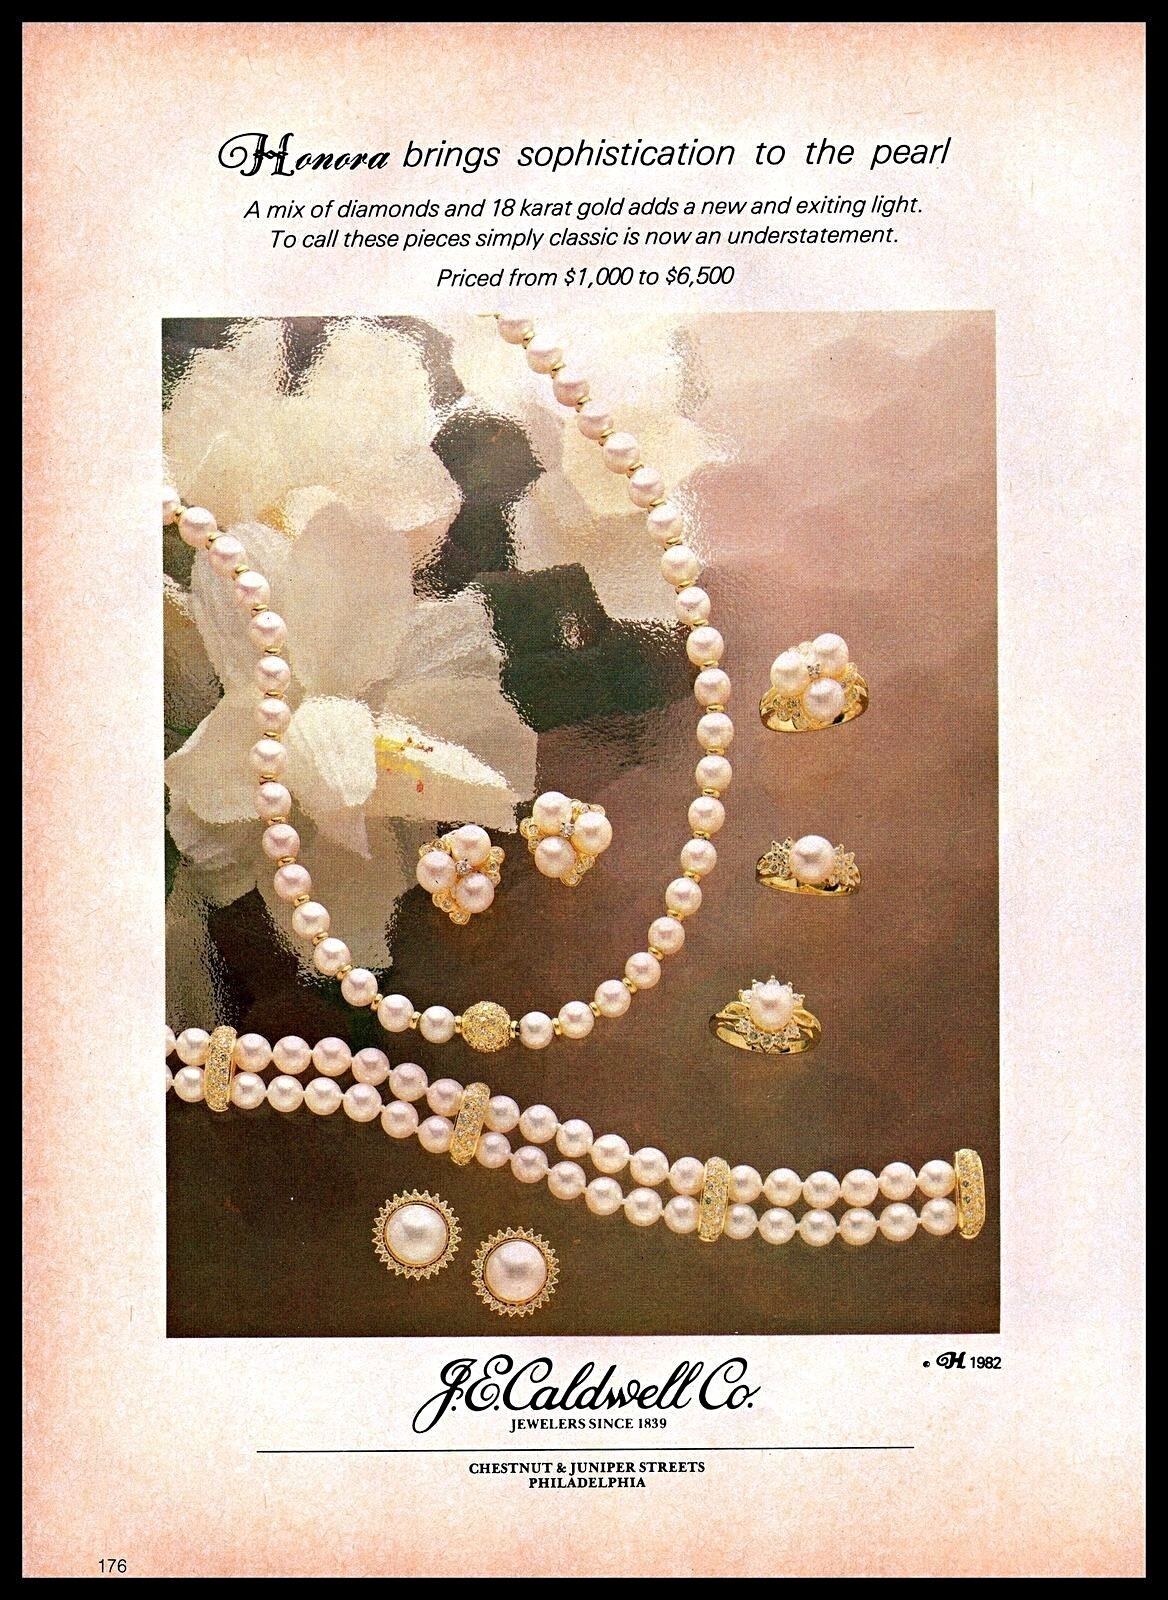 1982 J.E. Caldwell and Co Jewelry Honora Perl Necklace Bracelet Ring VINTAGE AD